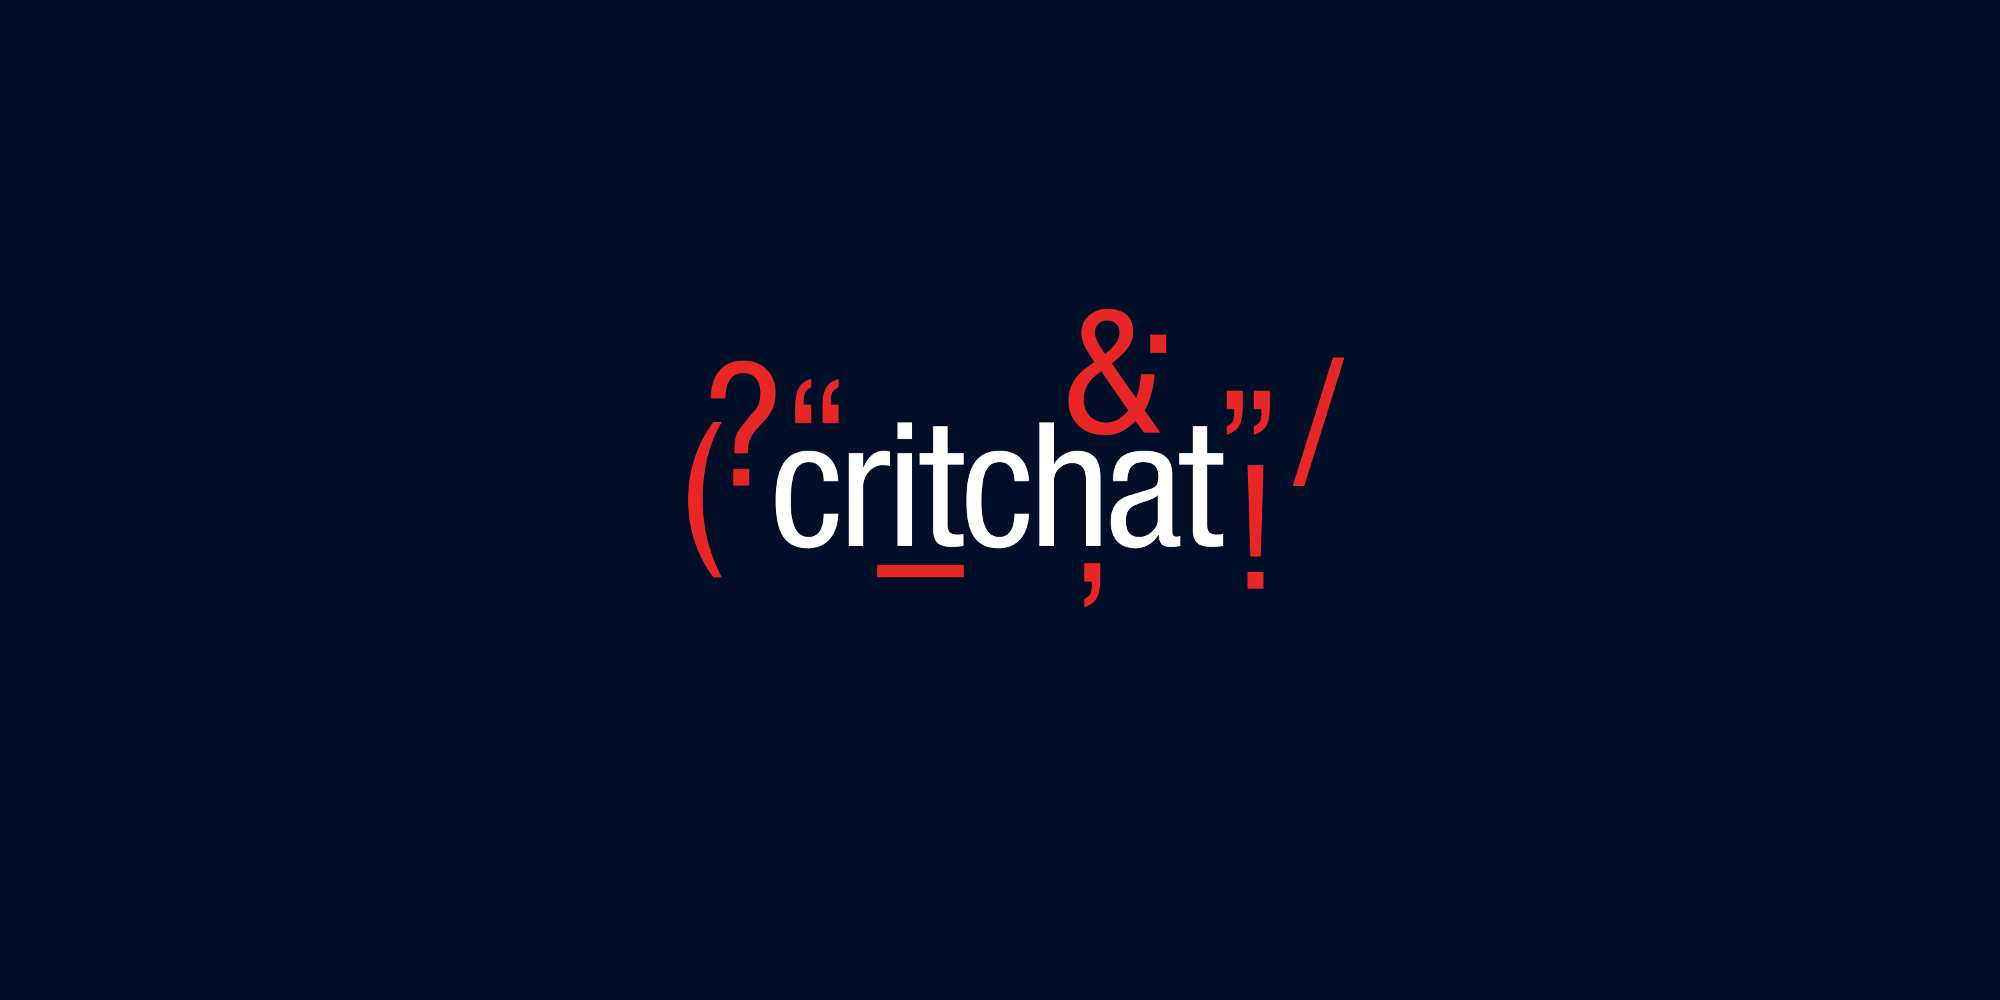 critchat #1: “Speechless” Submissions